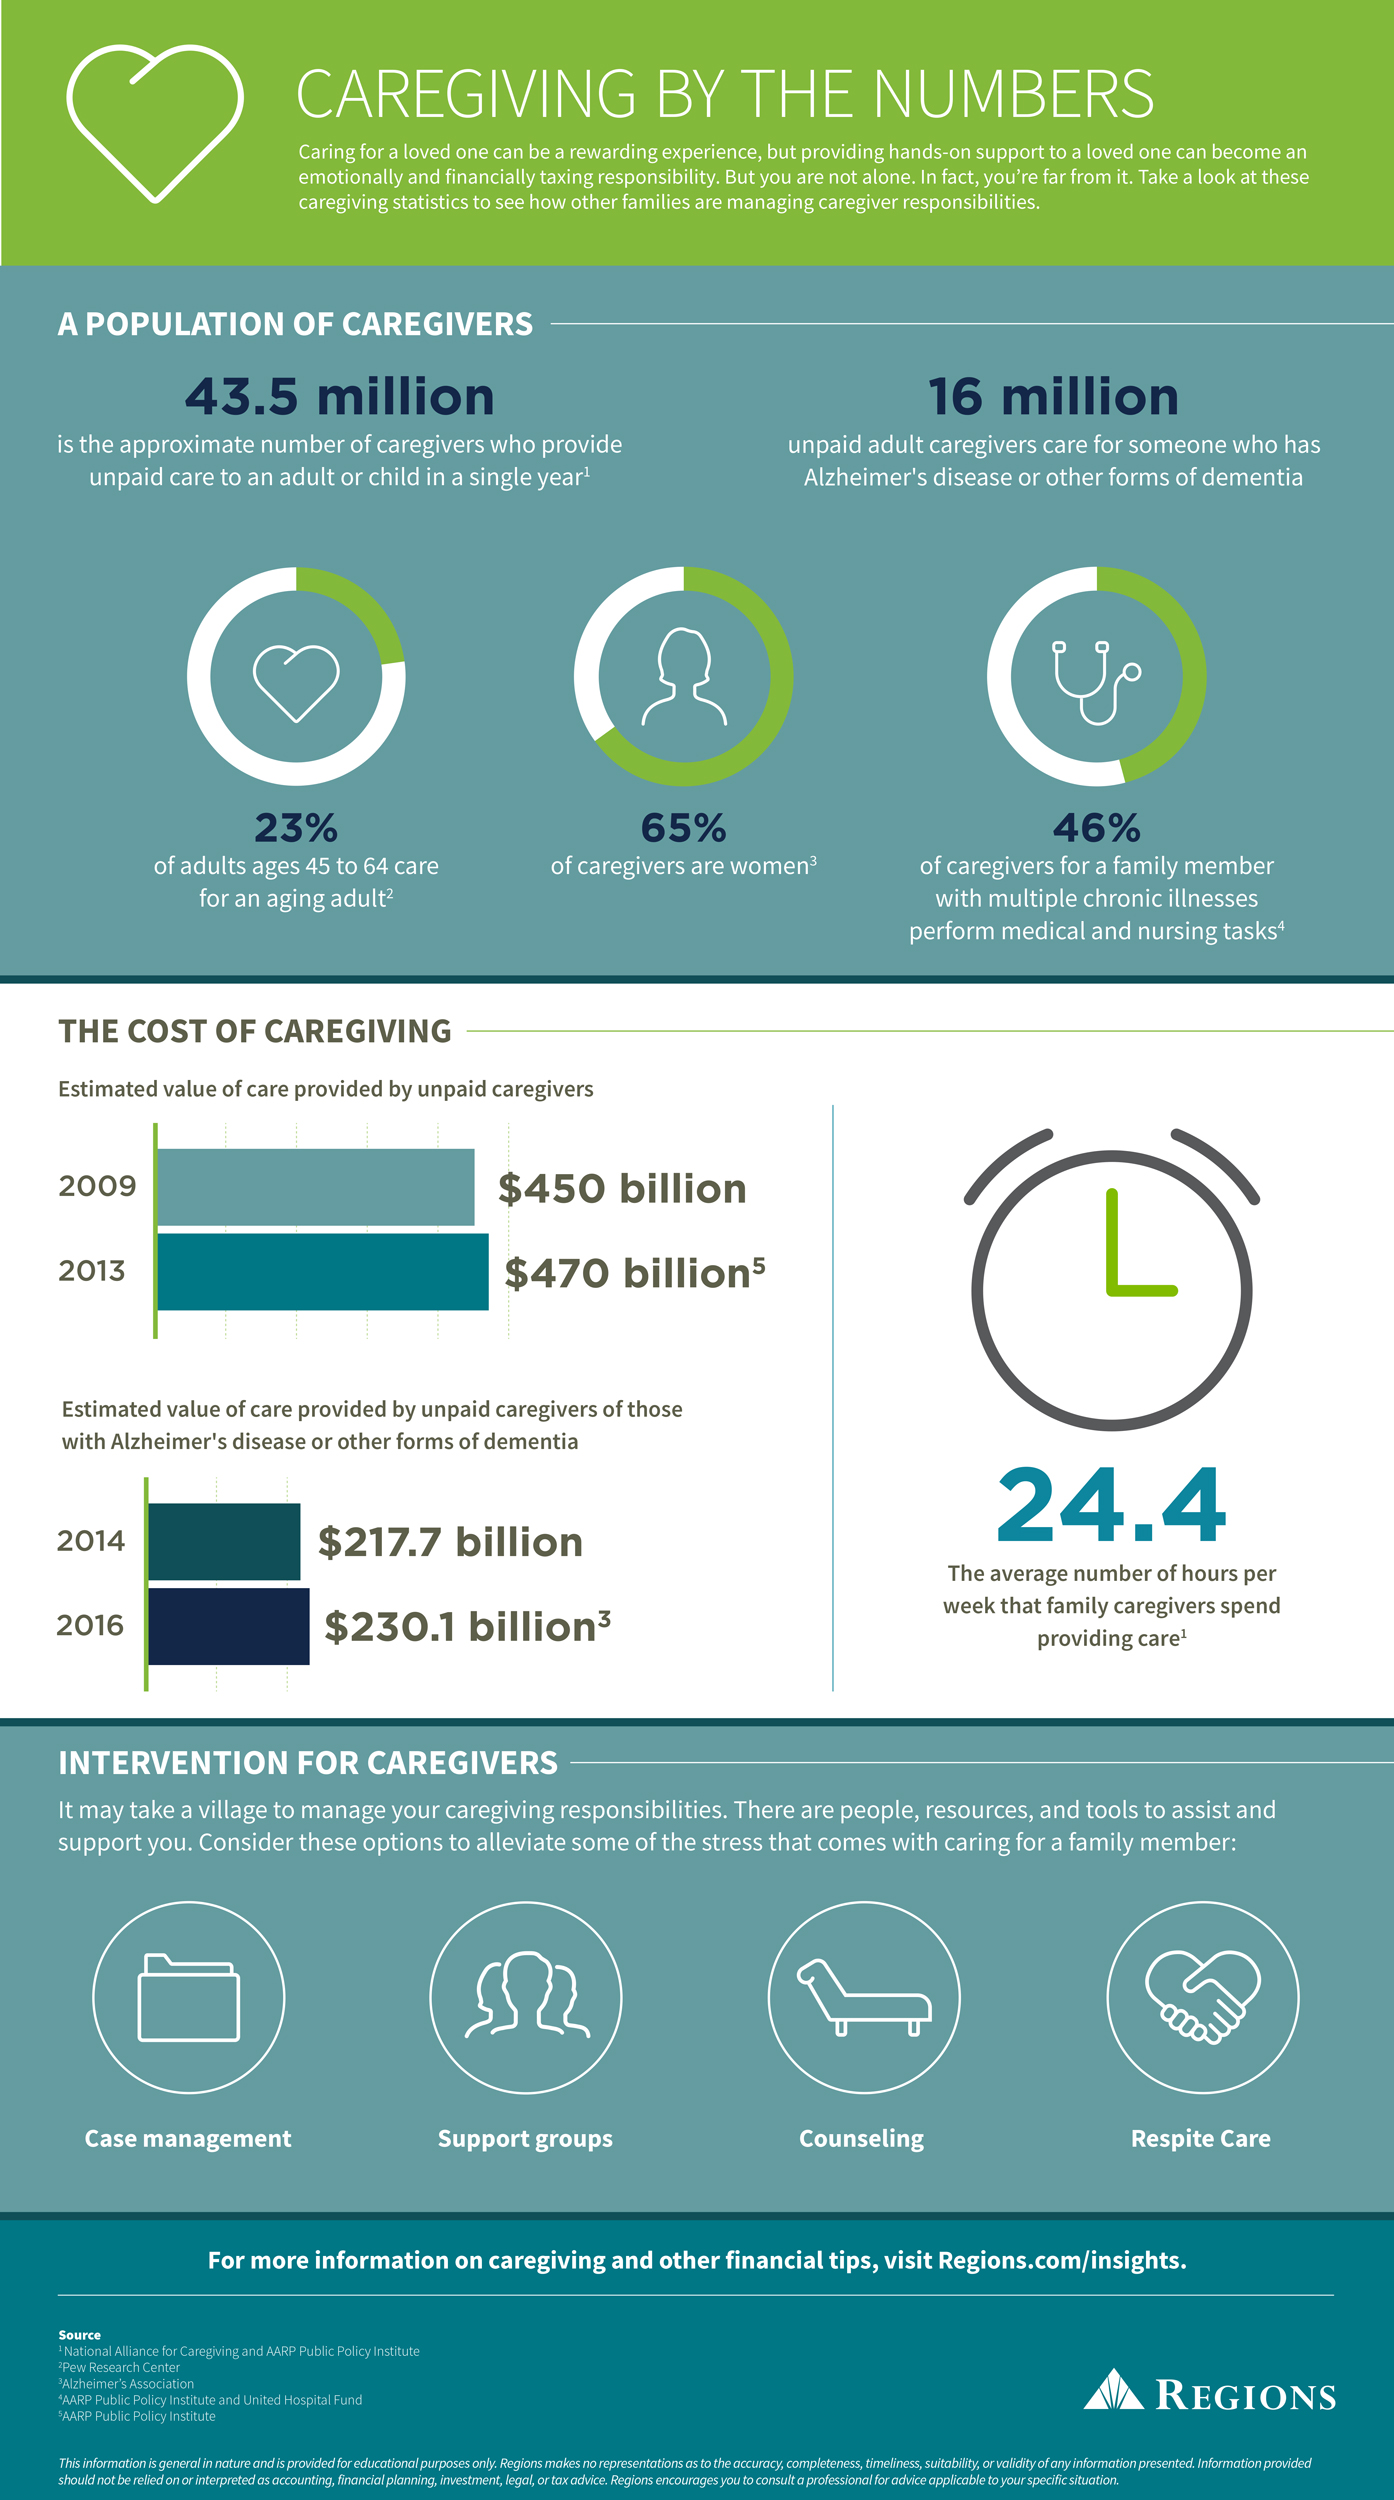 Caregiving by the numbers infographic